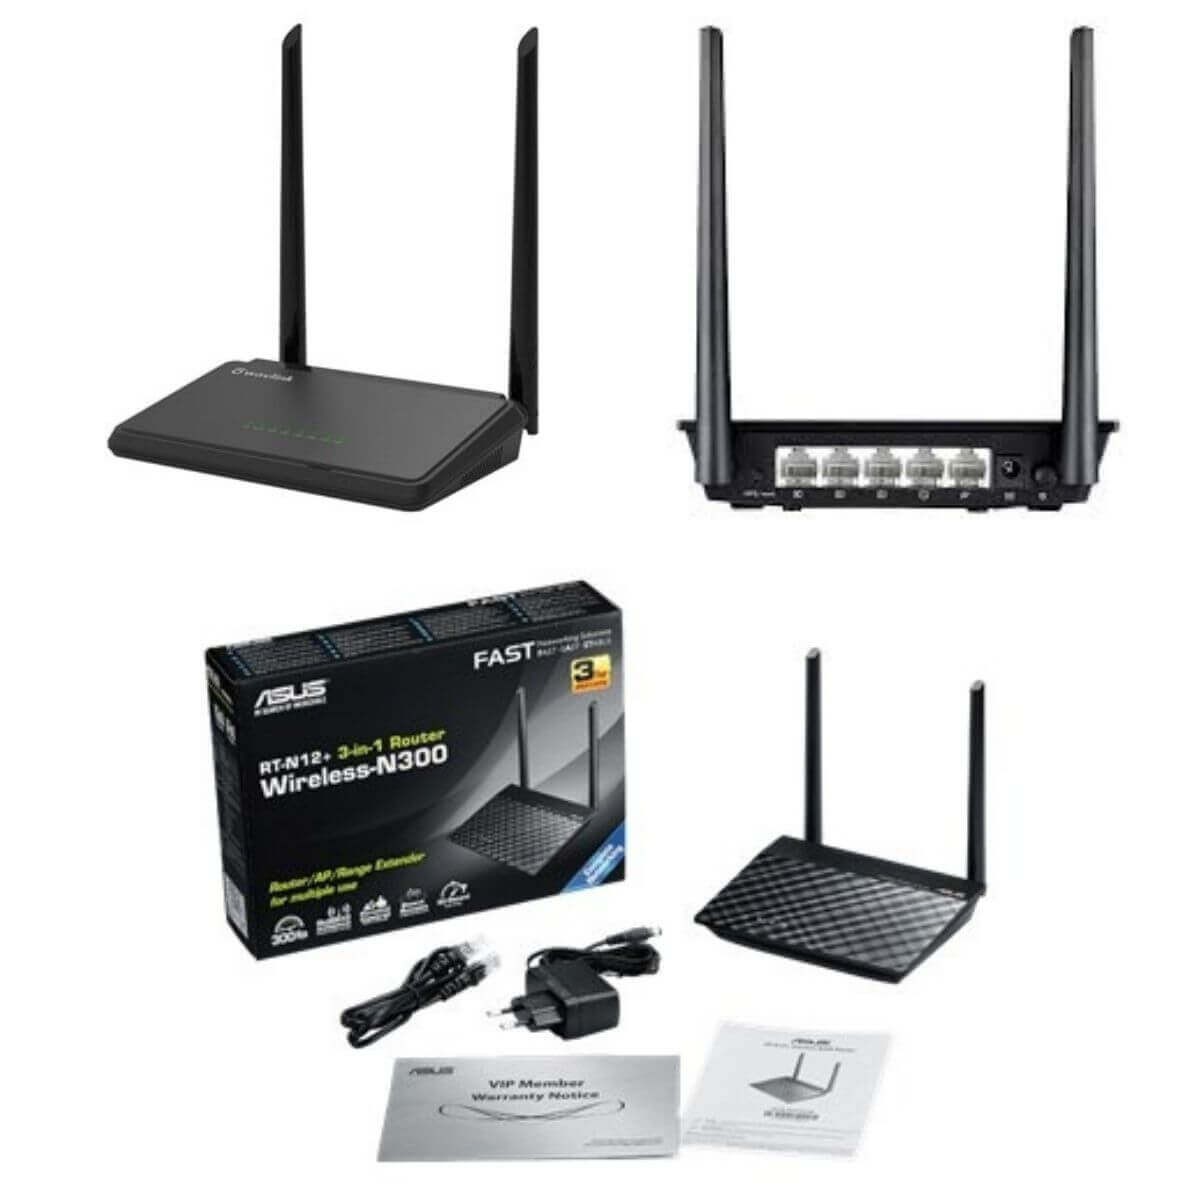 Asus RTN12+ Standard Router 300NBD